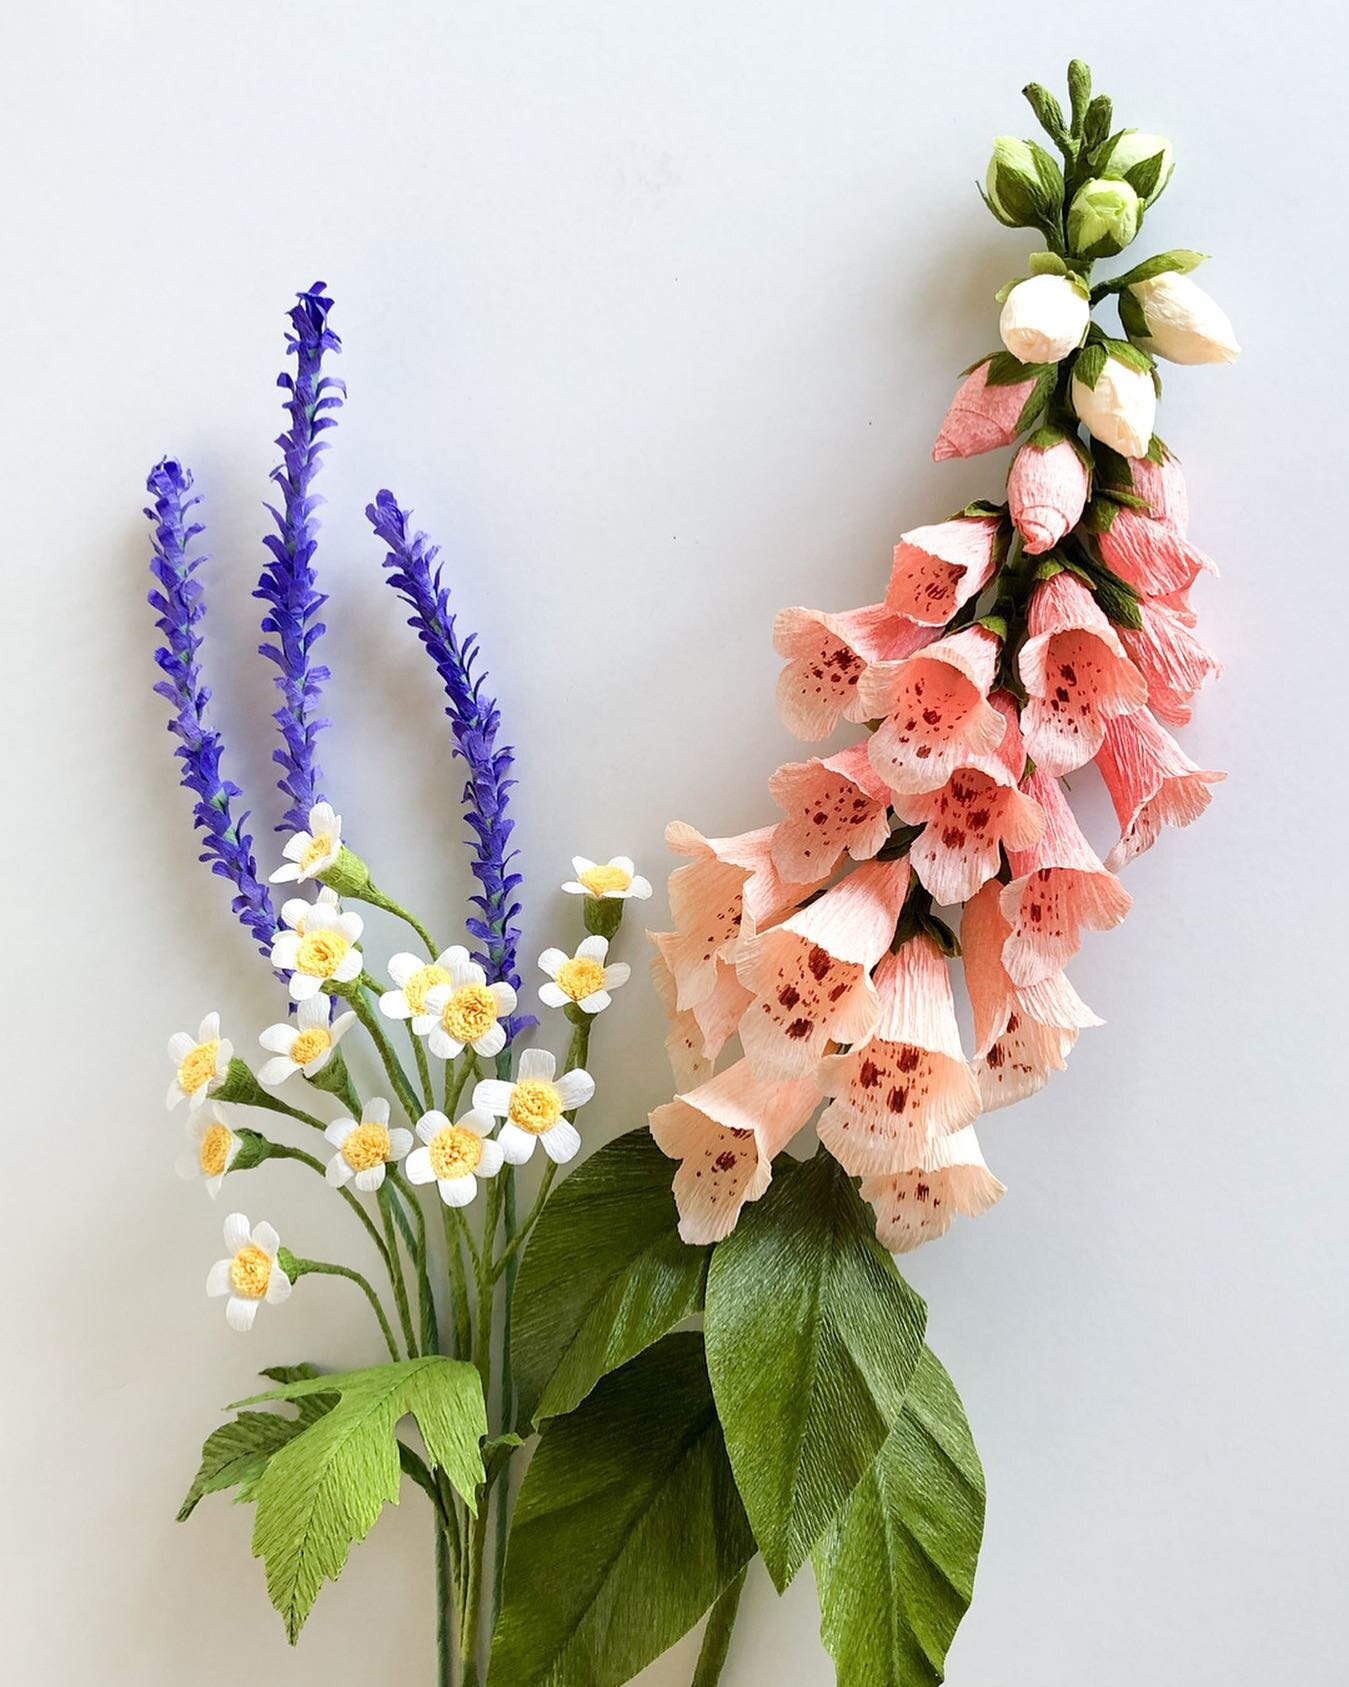 Hey friends, it's August! This month, I'll be sharing several tutorials - the foxglove will be a full step by step video with template, available exclusively to my Patreon members. The lavender and feverfew, which make wonderful fillers for bouquets 